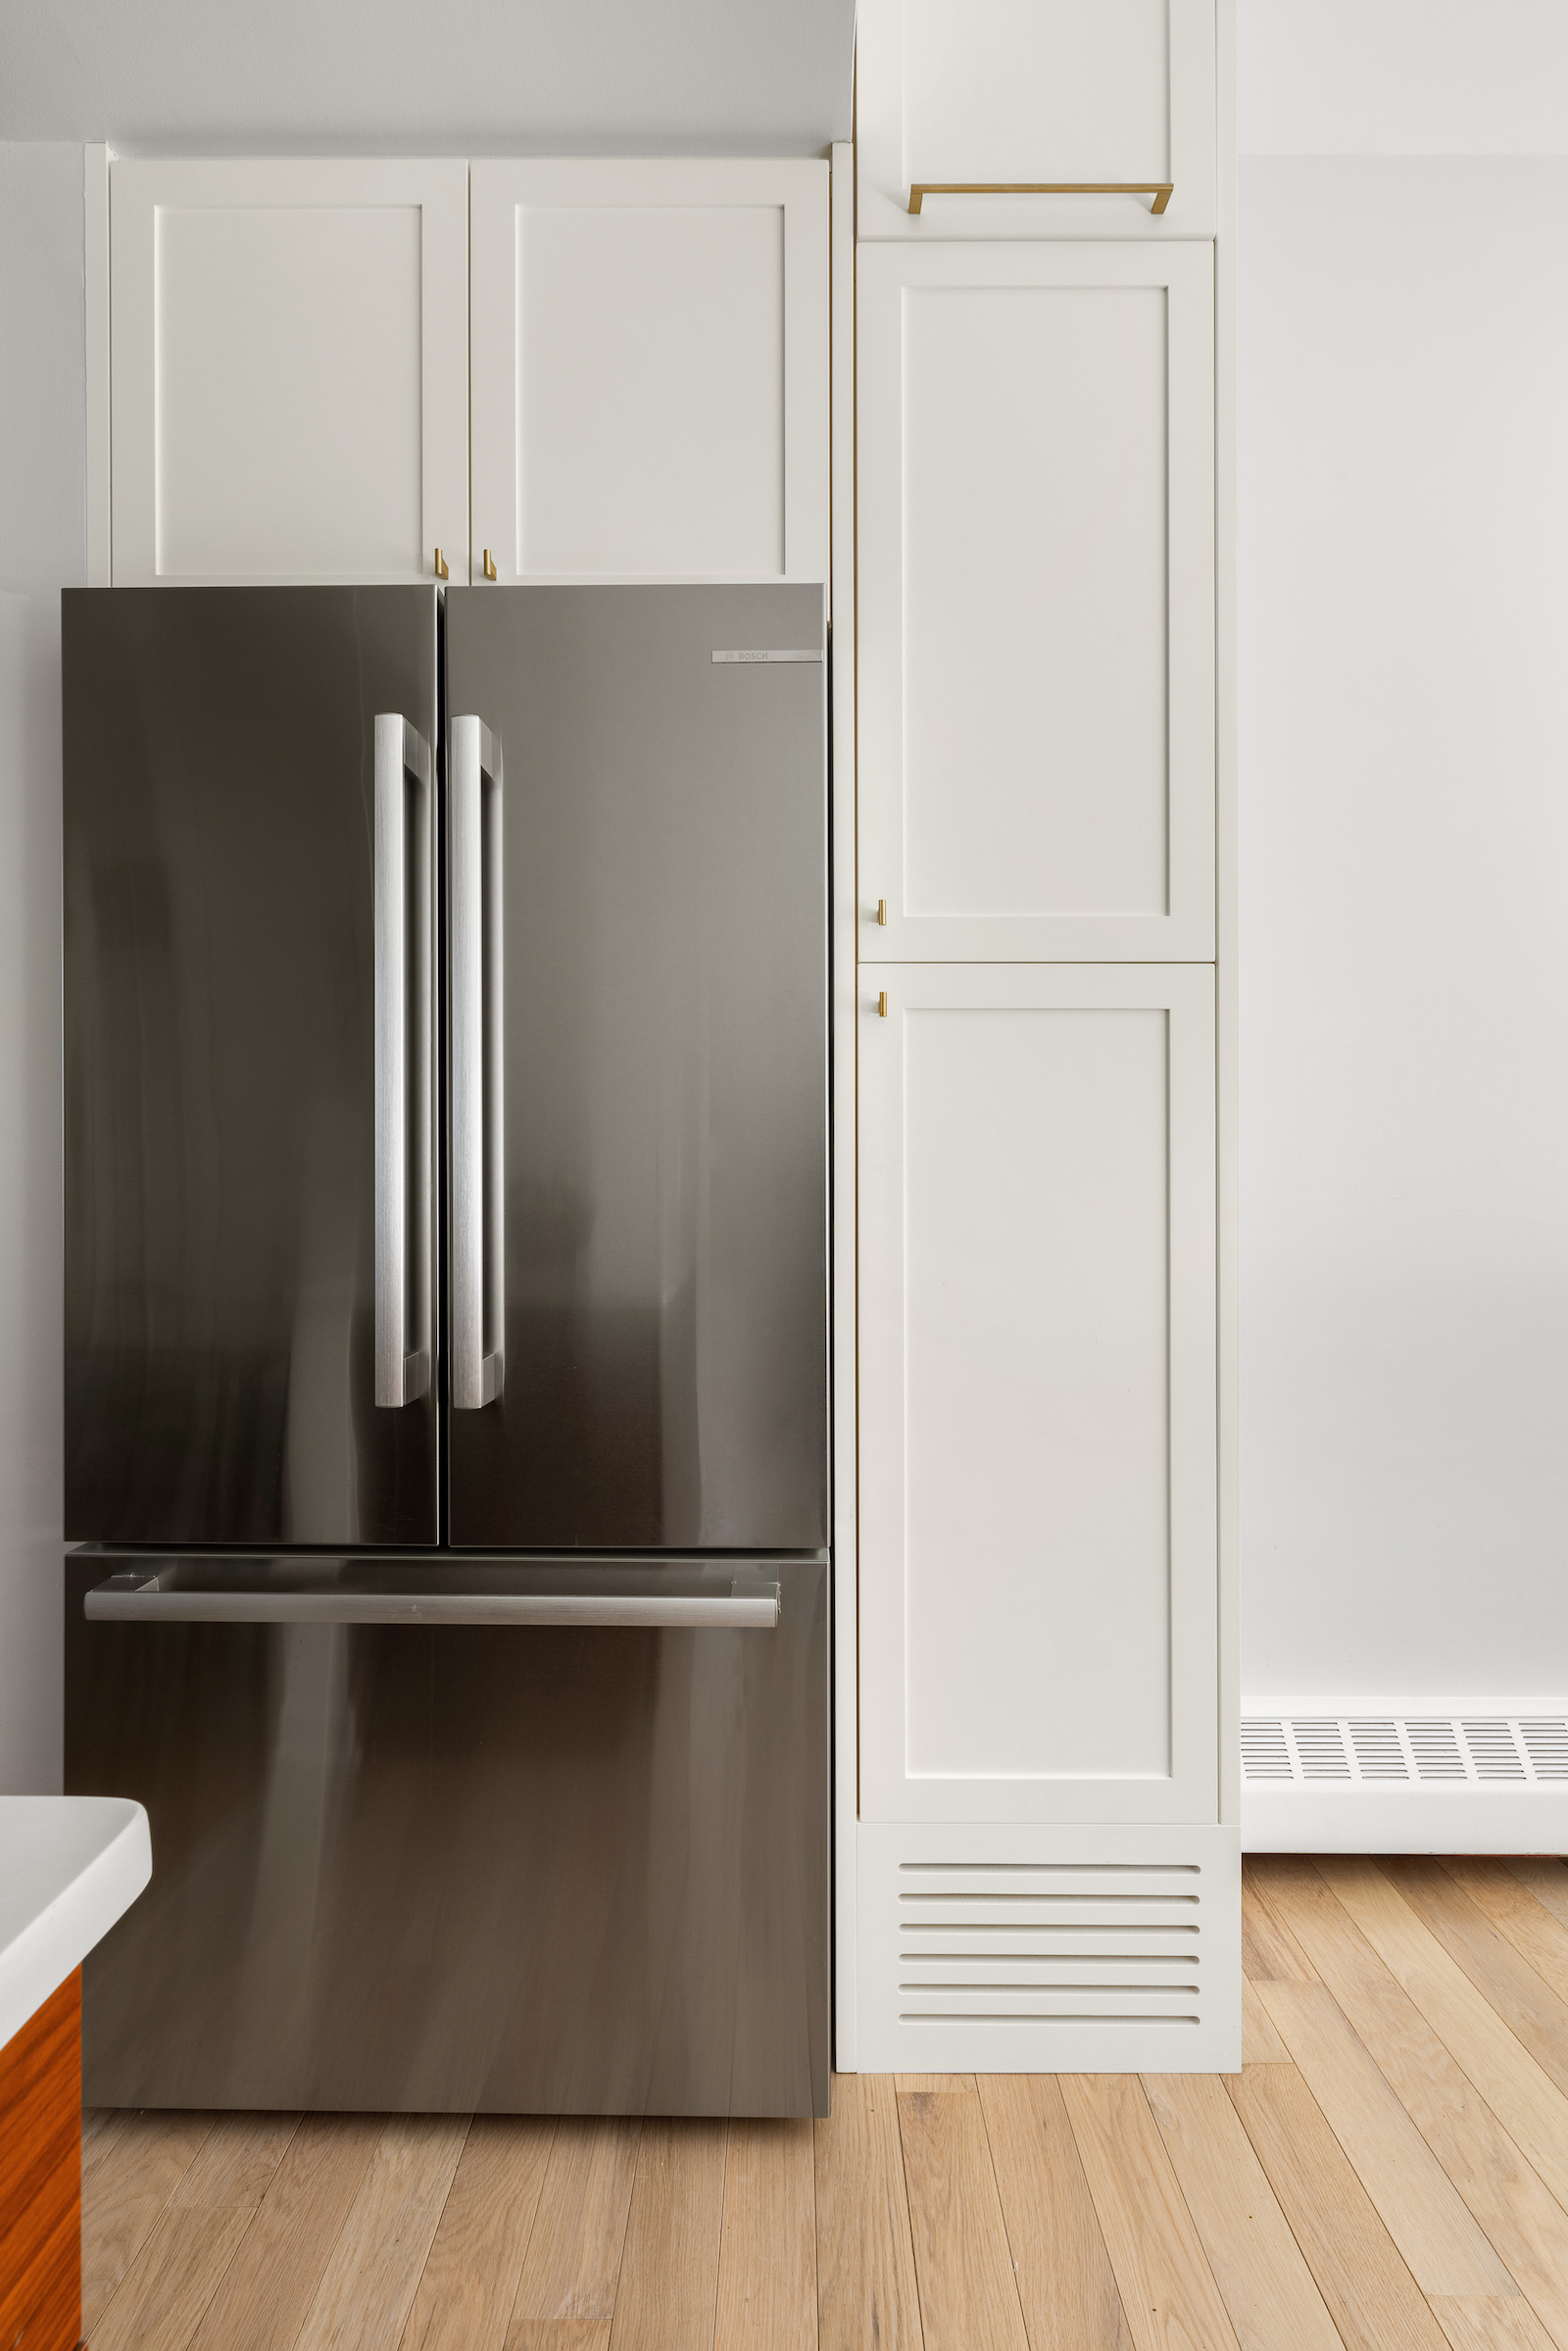 kitchen with built-in cabinets around fridge bed-stuy